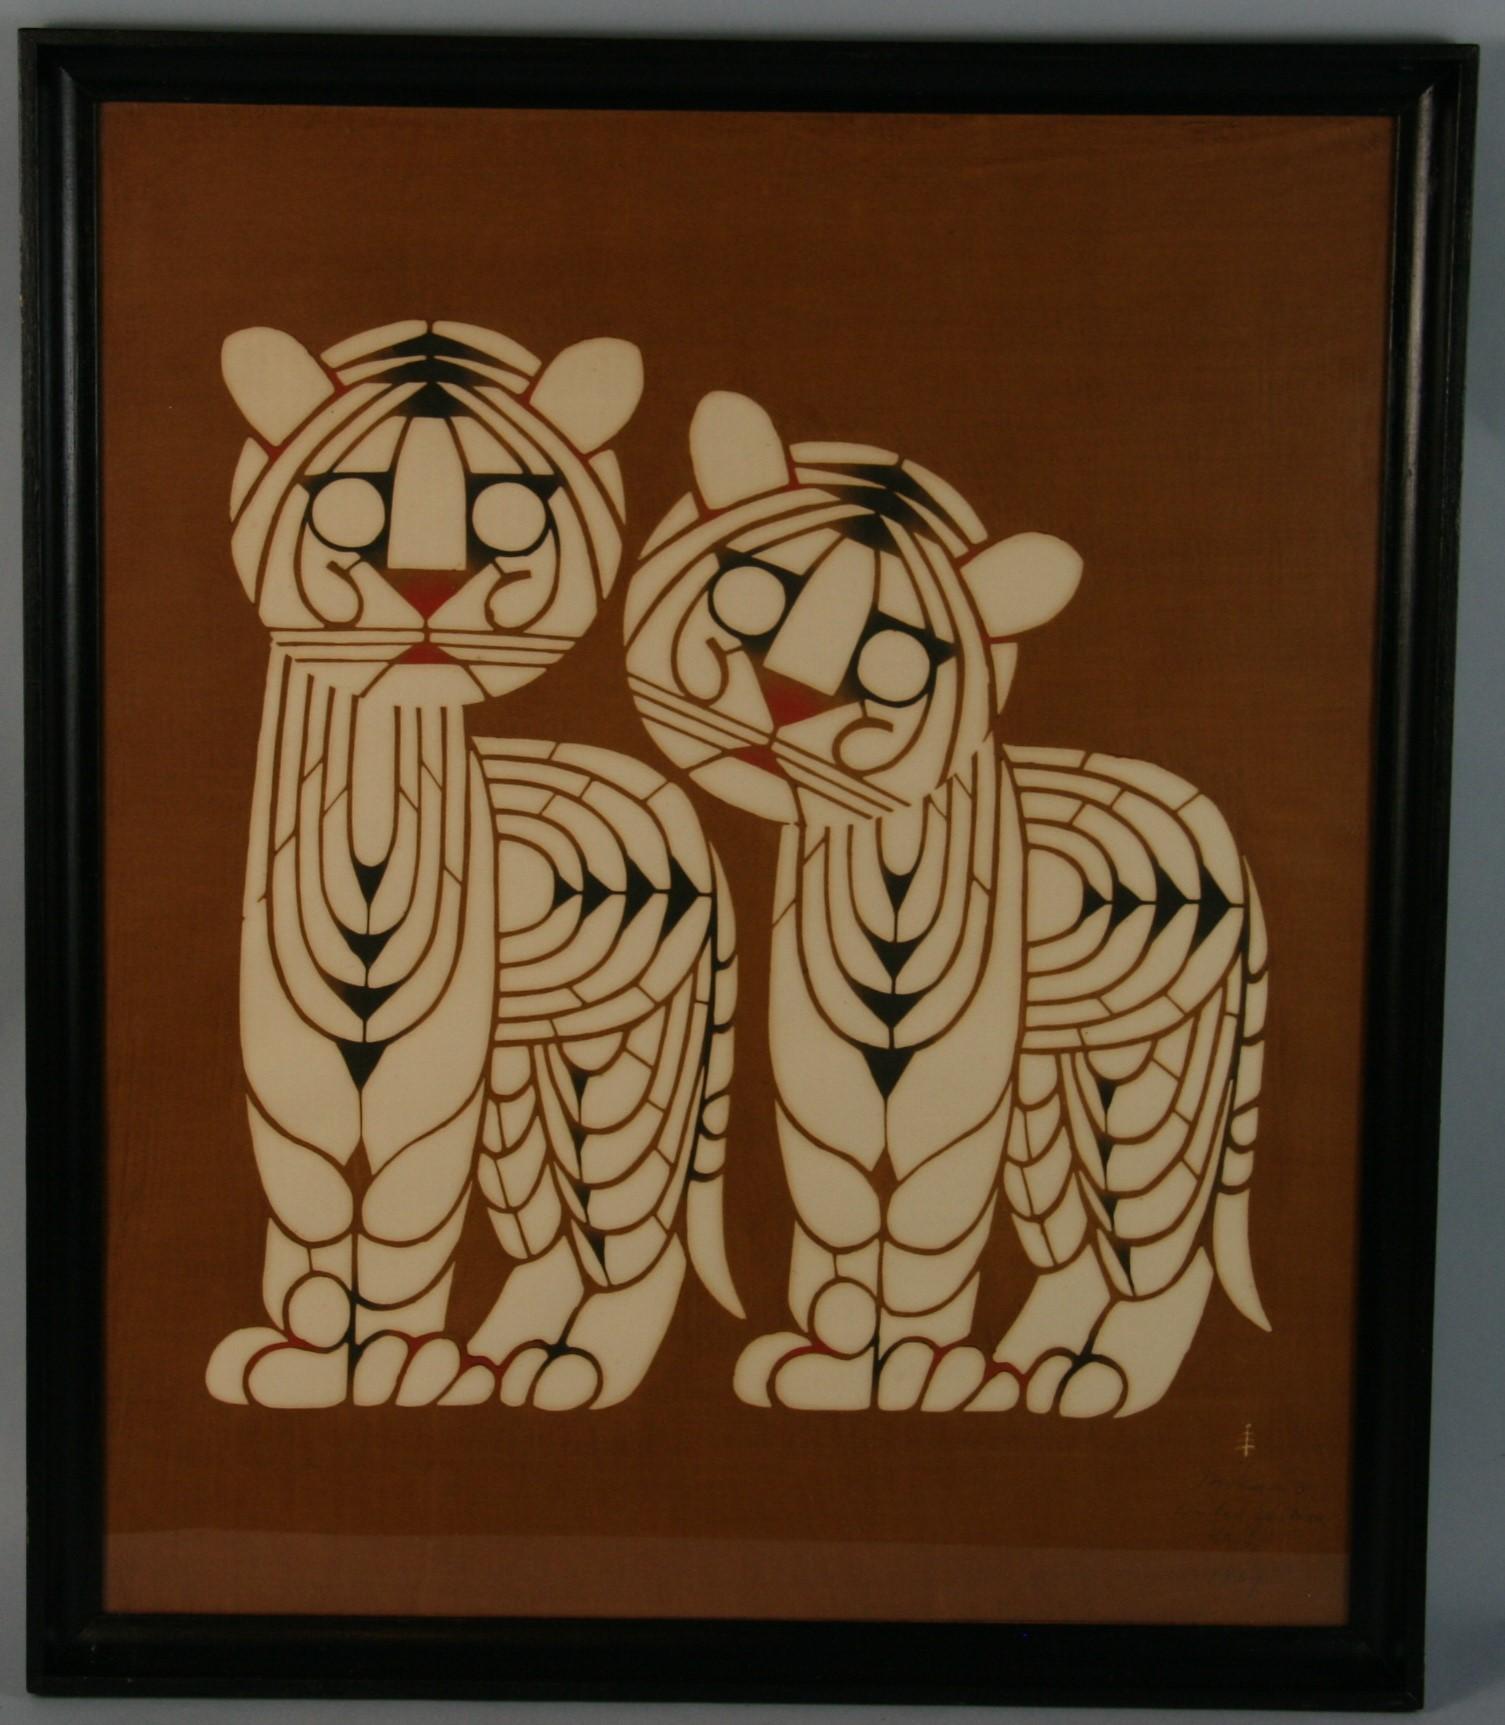 3899 Signed original serigraph #5 of to tigers by Japanese artist Inikumo 1967.